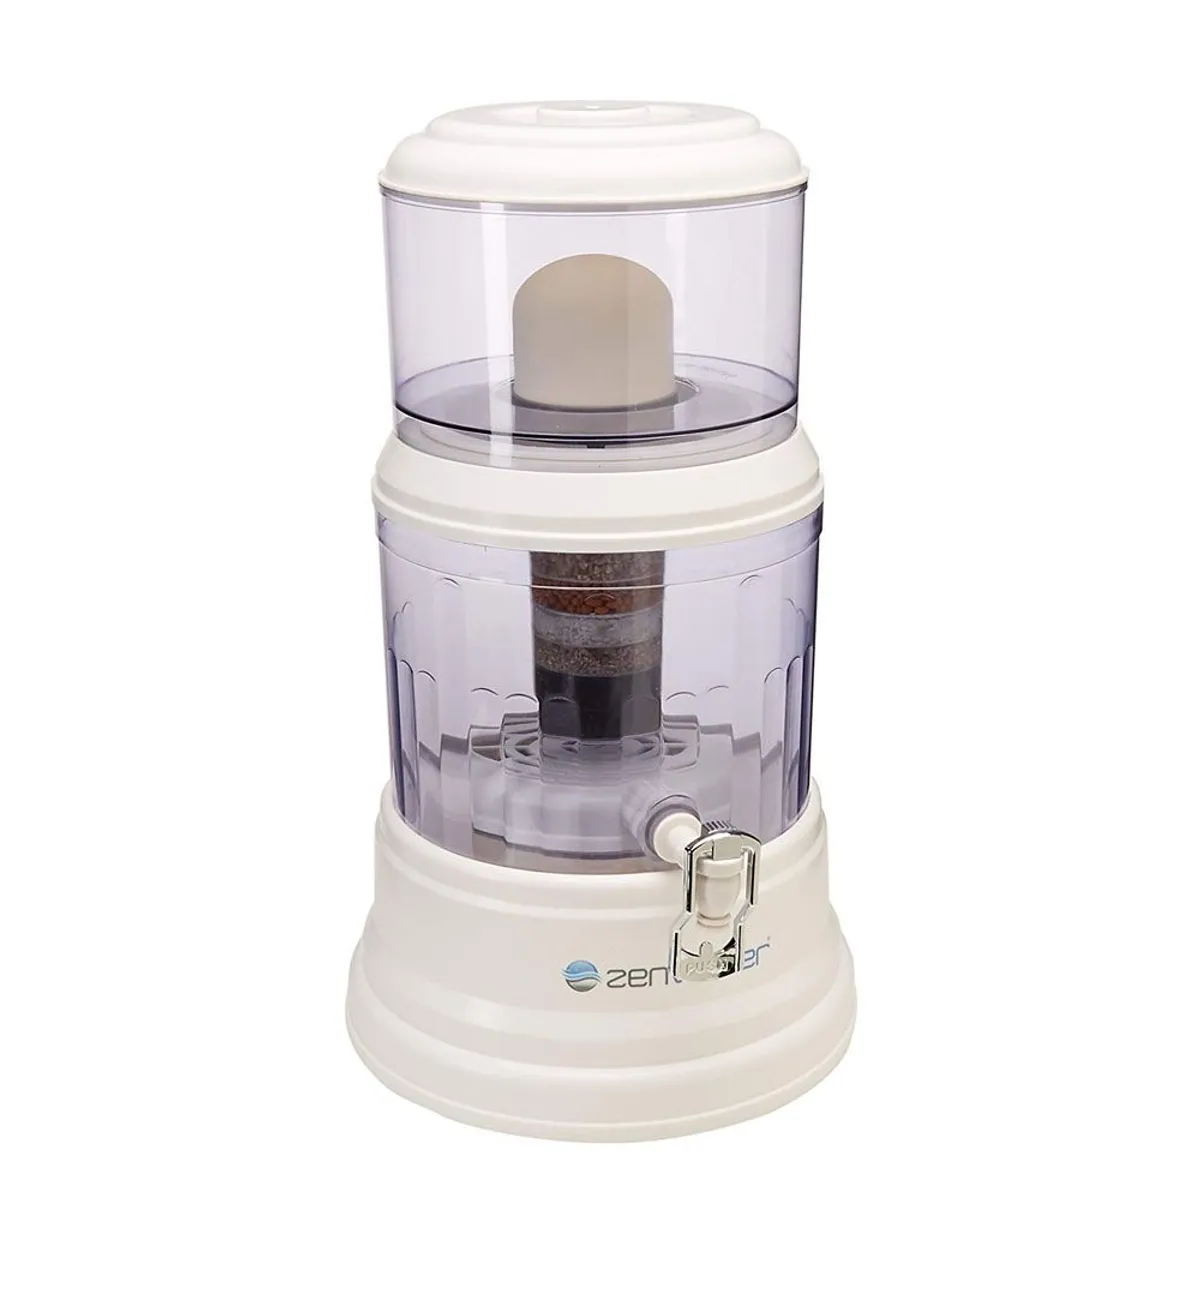 Zen Water Systems Countertop Filtration and Purification System Review